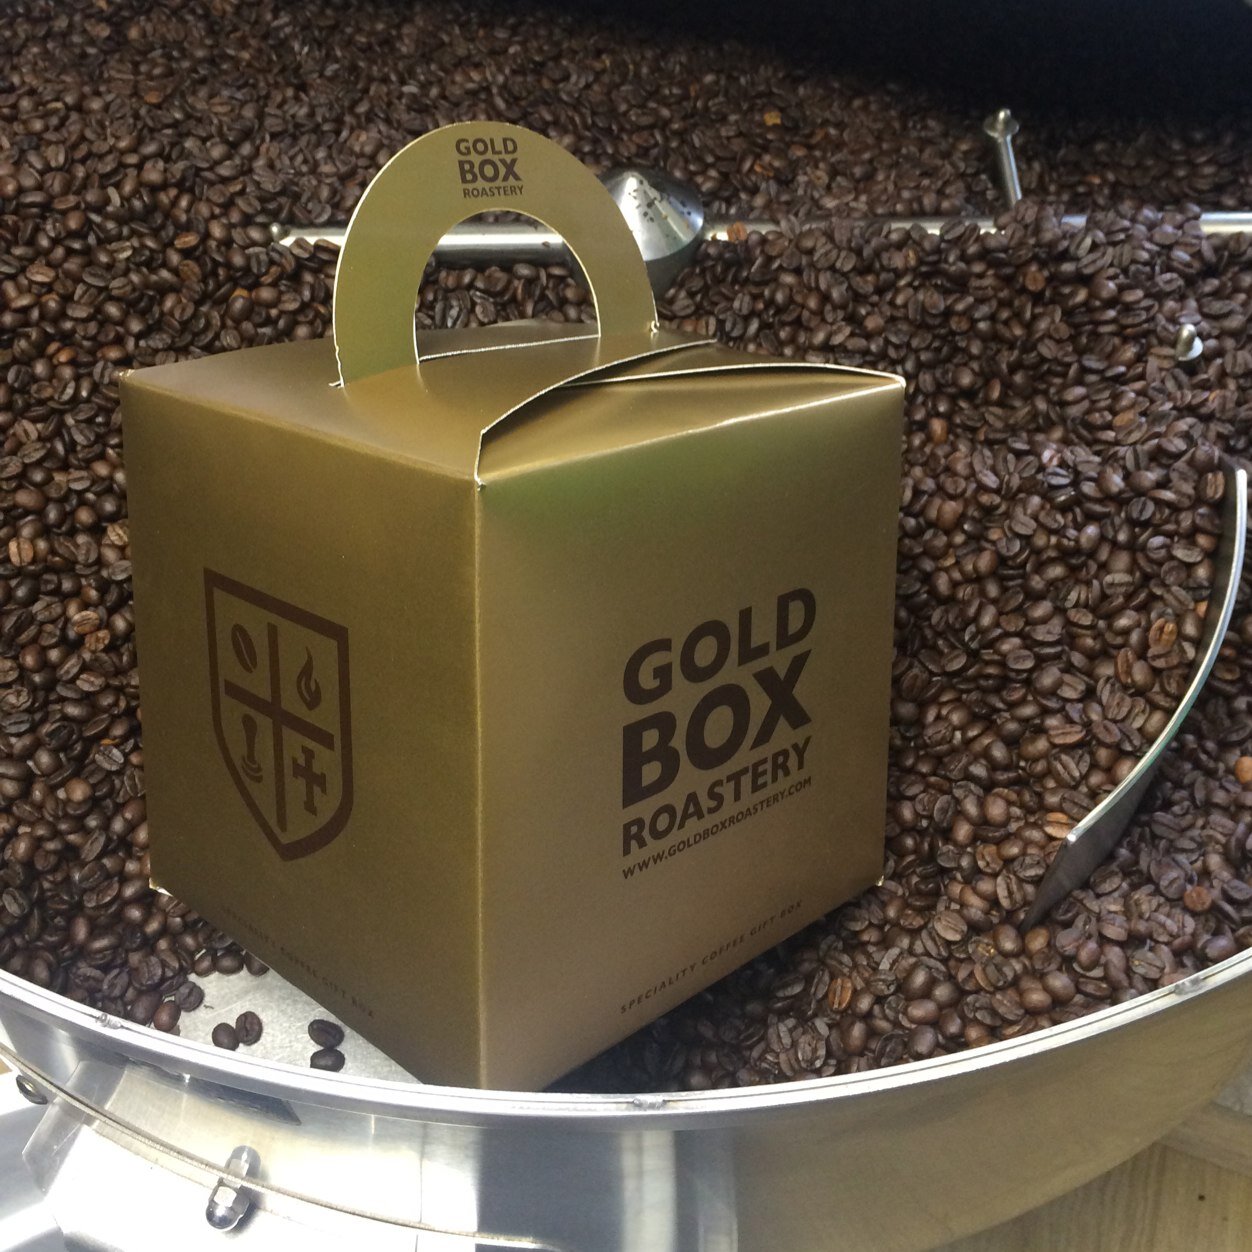 We're a small independant roastery sourcing speciality coffee.